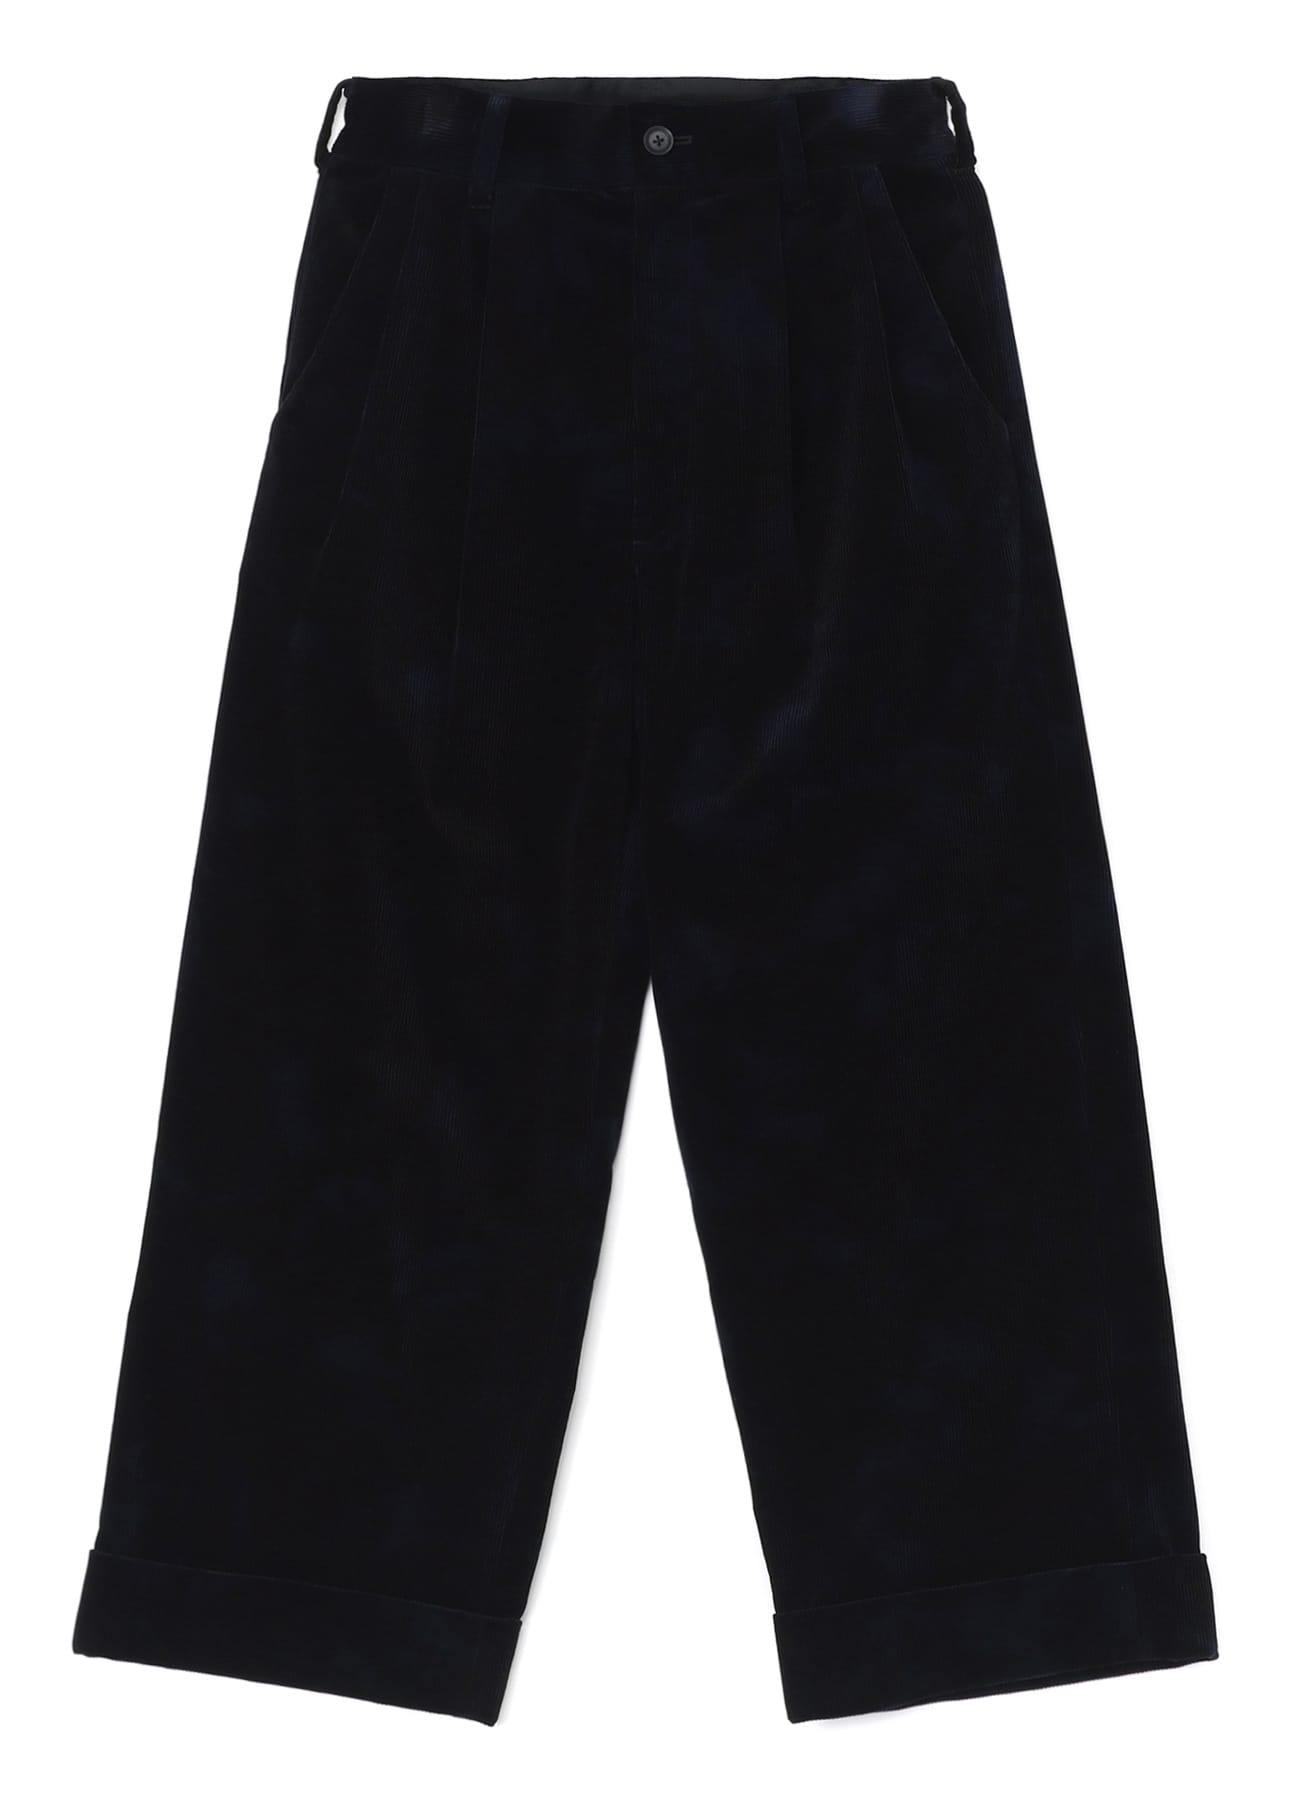 UNEVEN DYED CORDUROY 2 TUCK WIDE CUFFED PANTS(XS NAVY): Vintage 